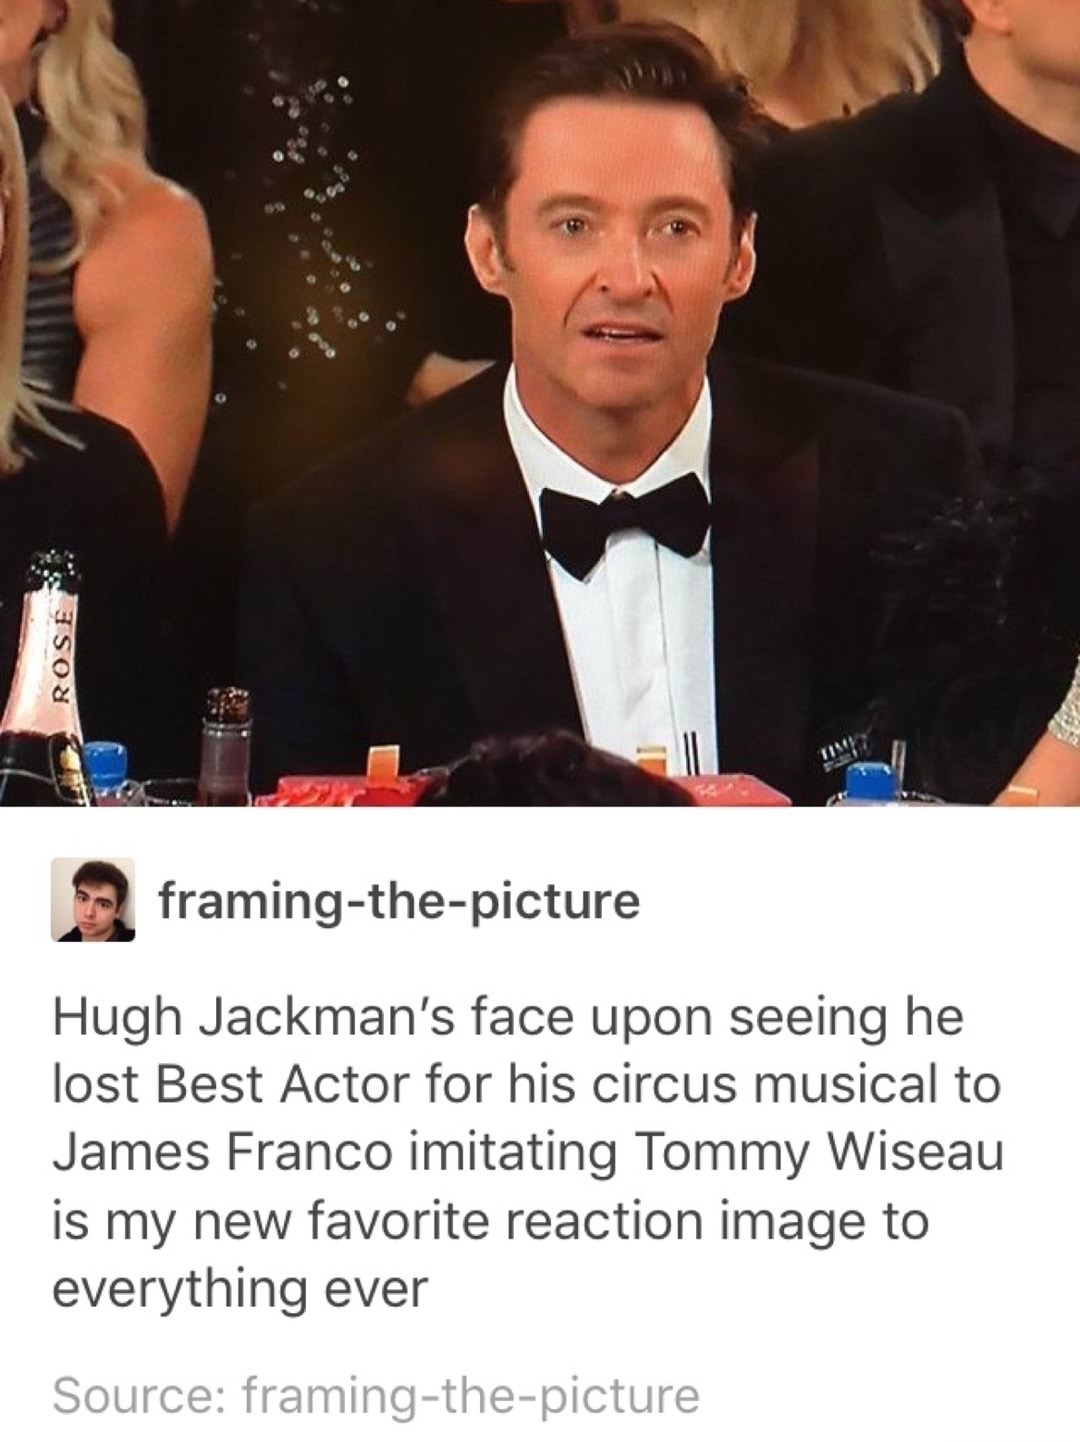 hugh jackman losing to james franco - Rose framingthepicture Hugh Jackman's face upon seeing he lost Best Actor for his circus musical to James Franco imitating Tommy Wiseau is my new favorite reaction image to everything ever Source framingthepicture